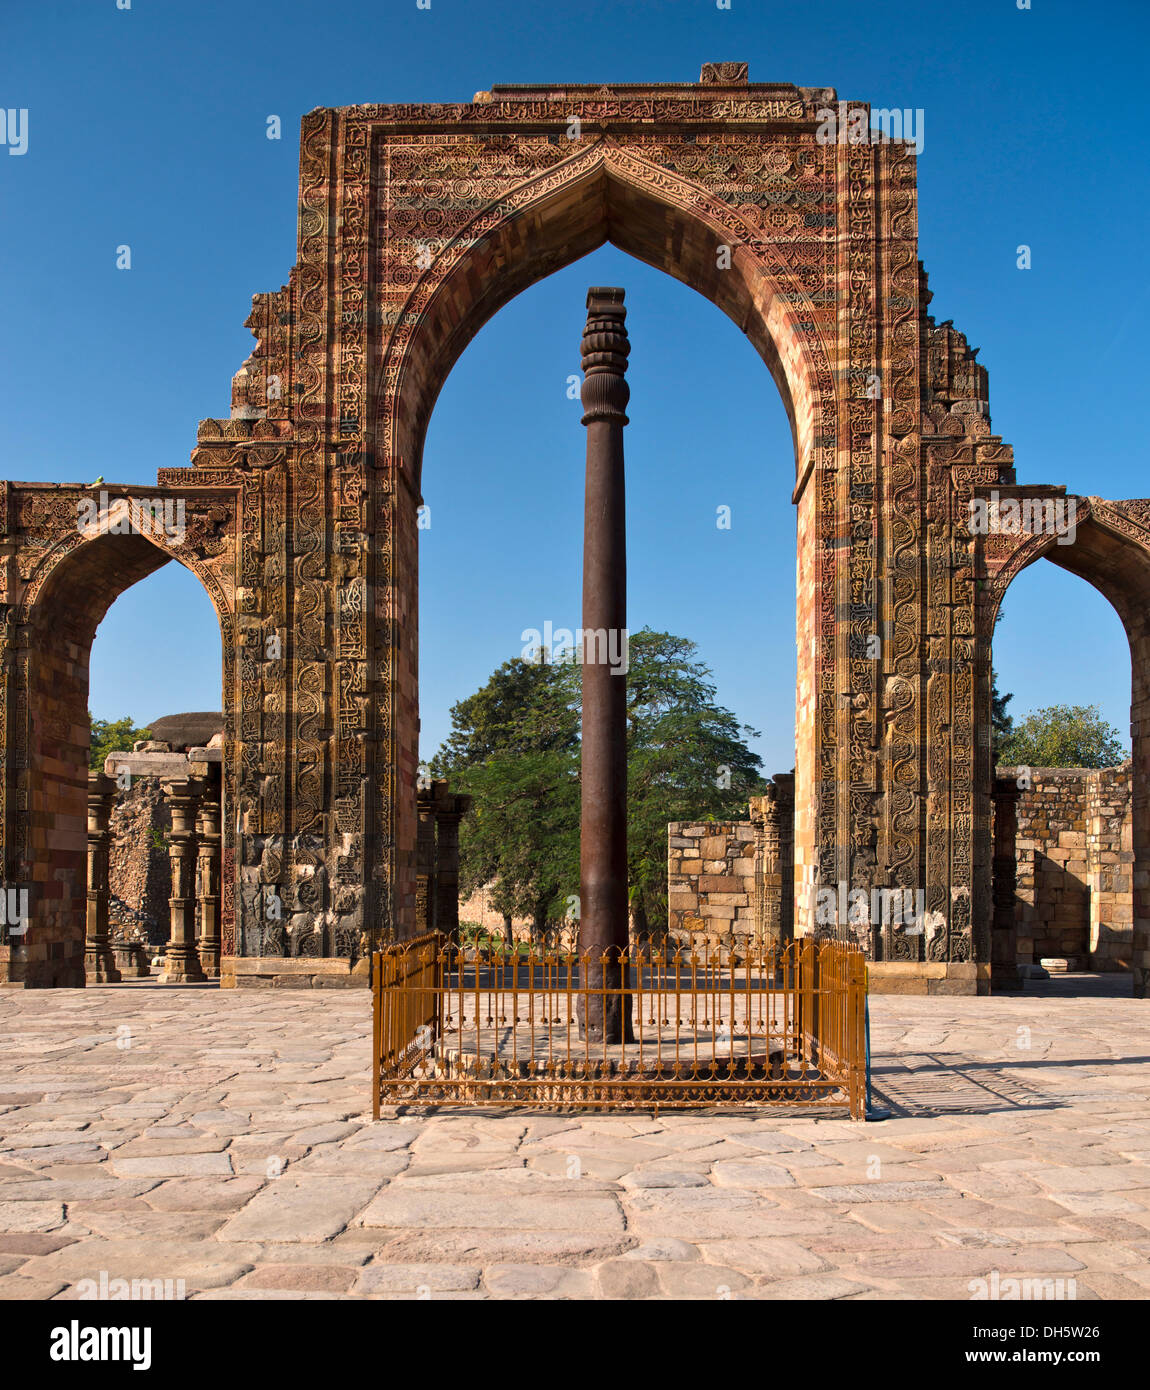 Entrance portal of the Quwwat-ul-Islam Masjid Mosque with relief decorations and an iron pillar in the courtyard, Qutb Minar Stock Photo